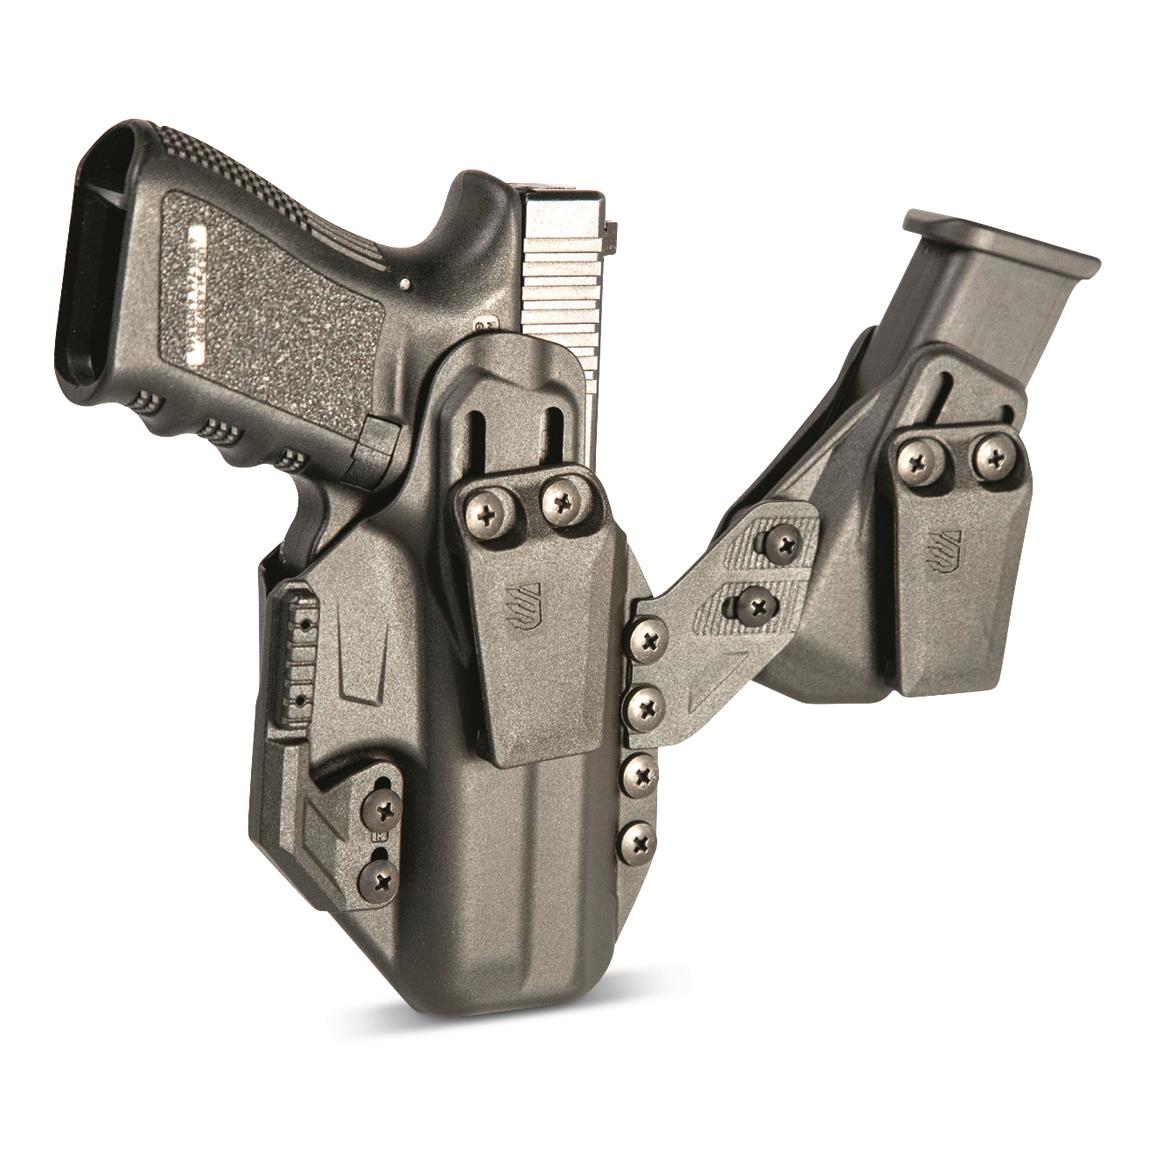 Blackhawk STACHE IWB Premium Holster, Glock 19/19x/23/32/44/45 with Streamlight TLR-7/7A/8/8A